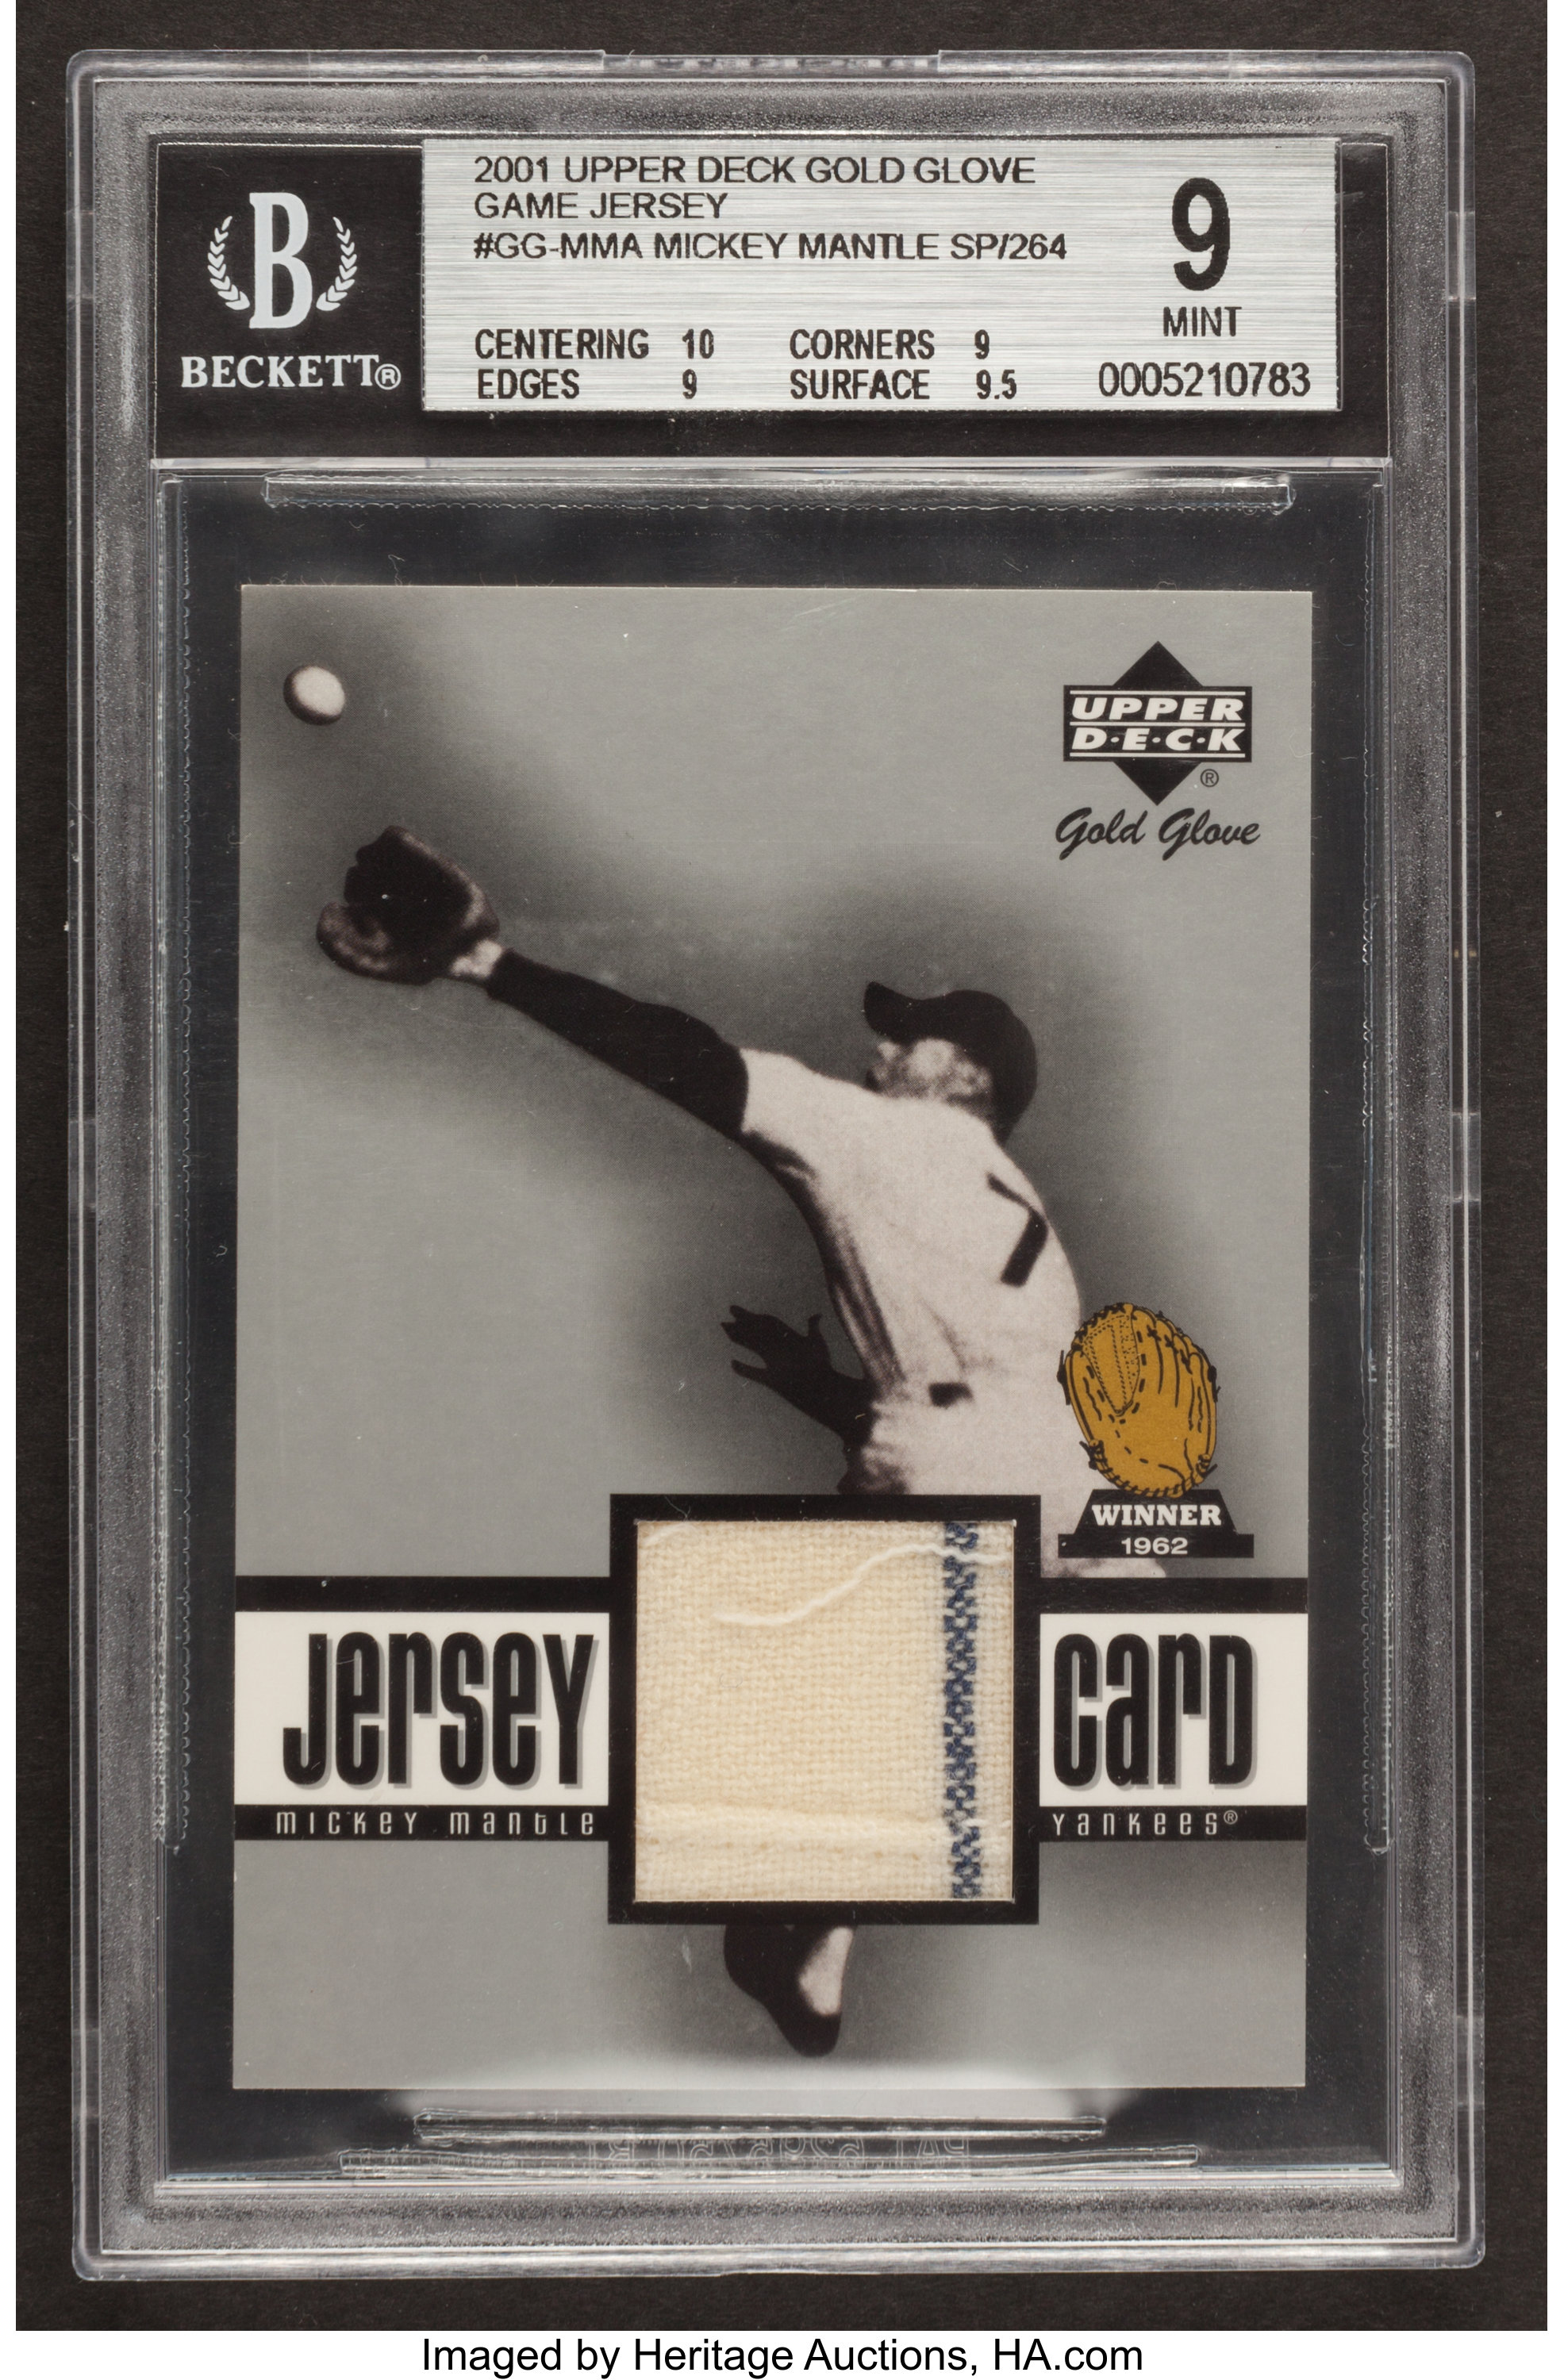 2001 Upper Deck Sweet Spot Mickey Mantle Game Used Jersey BGS 9.5